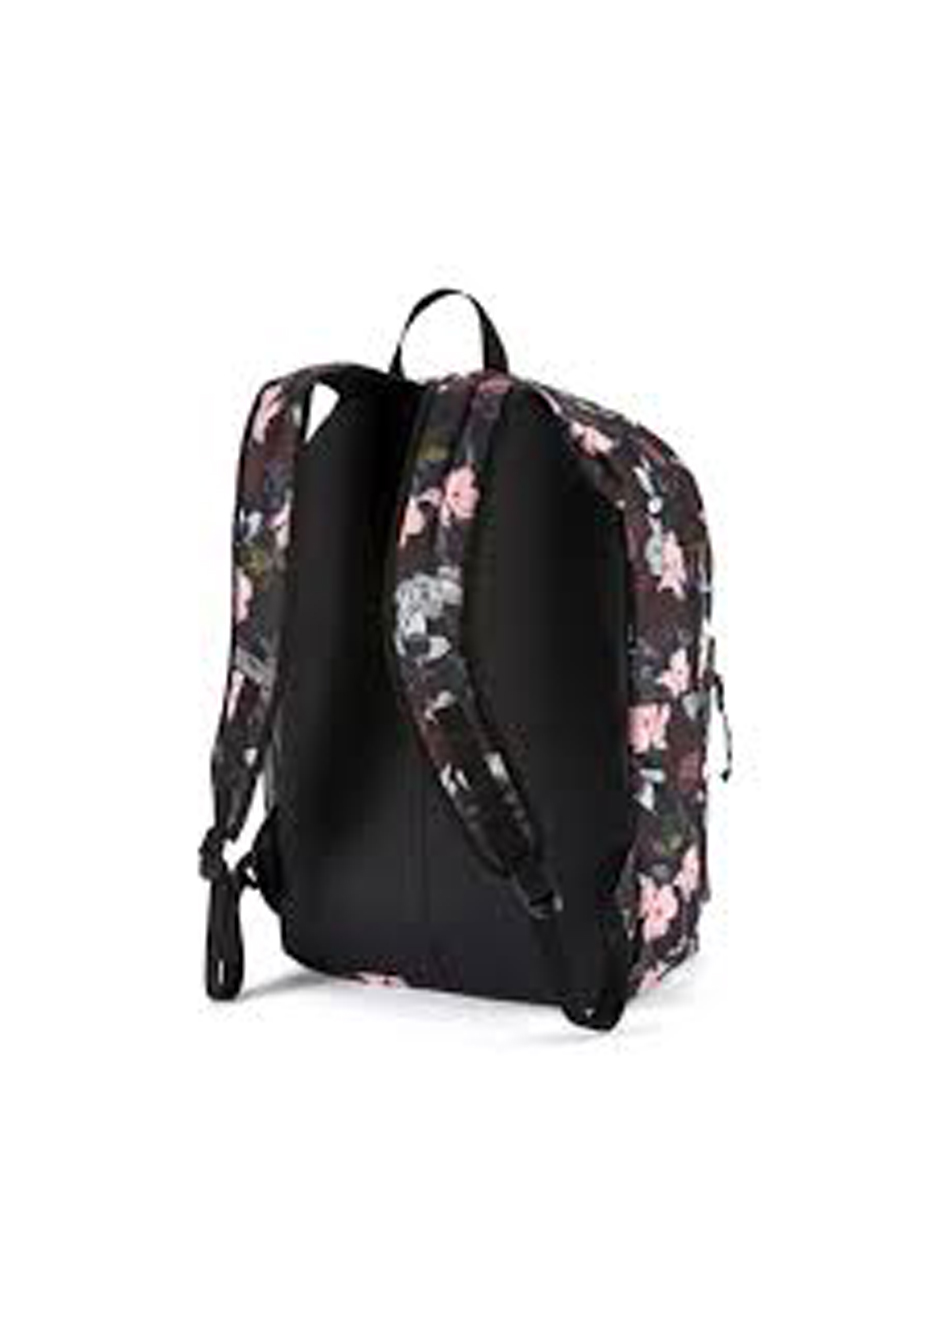 puma academy backpack floral